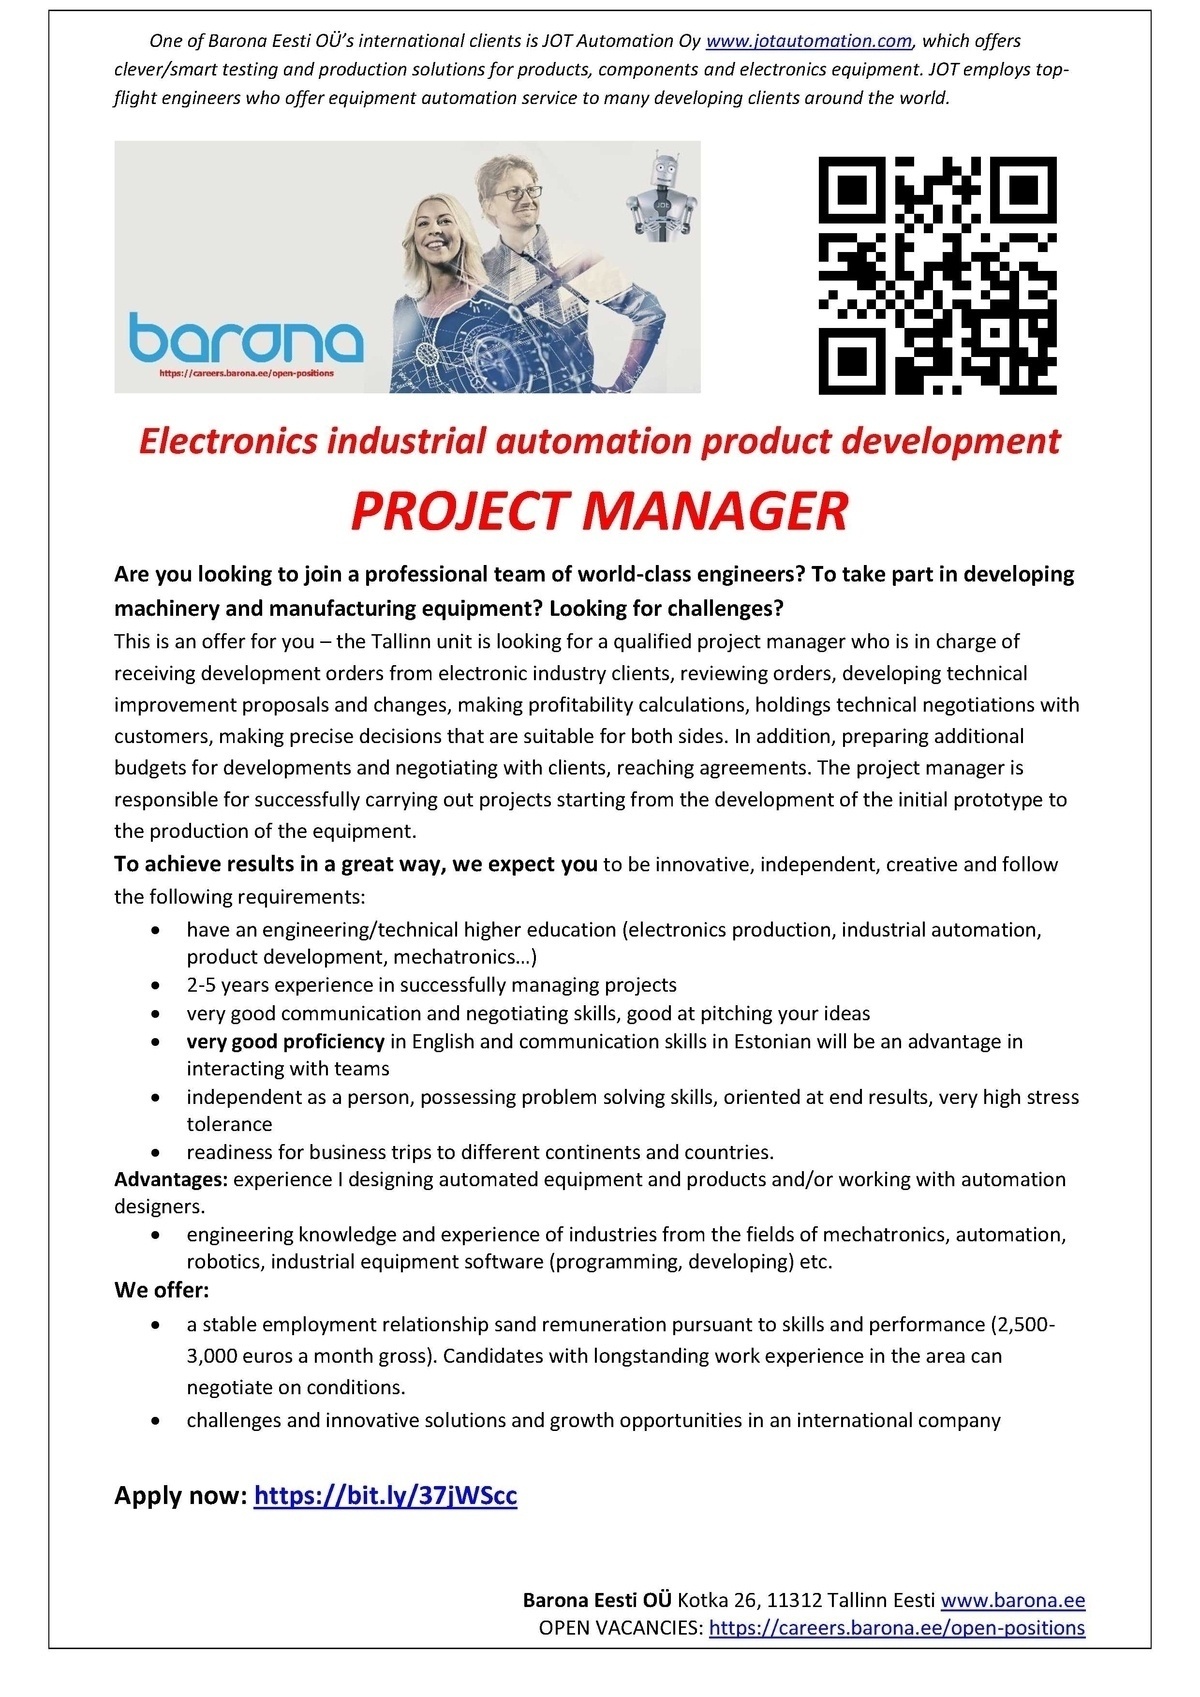 Barona Eesti OÜ Electronics industrial automation product development PROJECT MANAGER